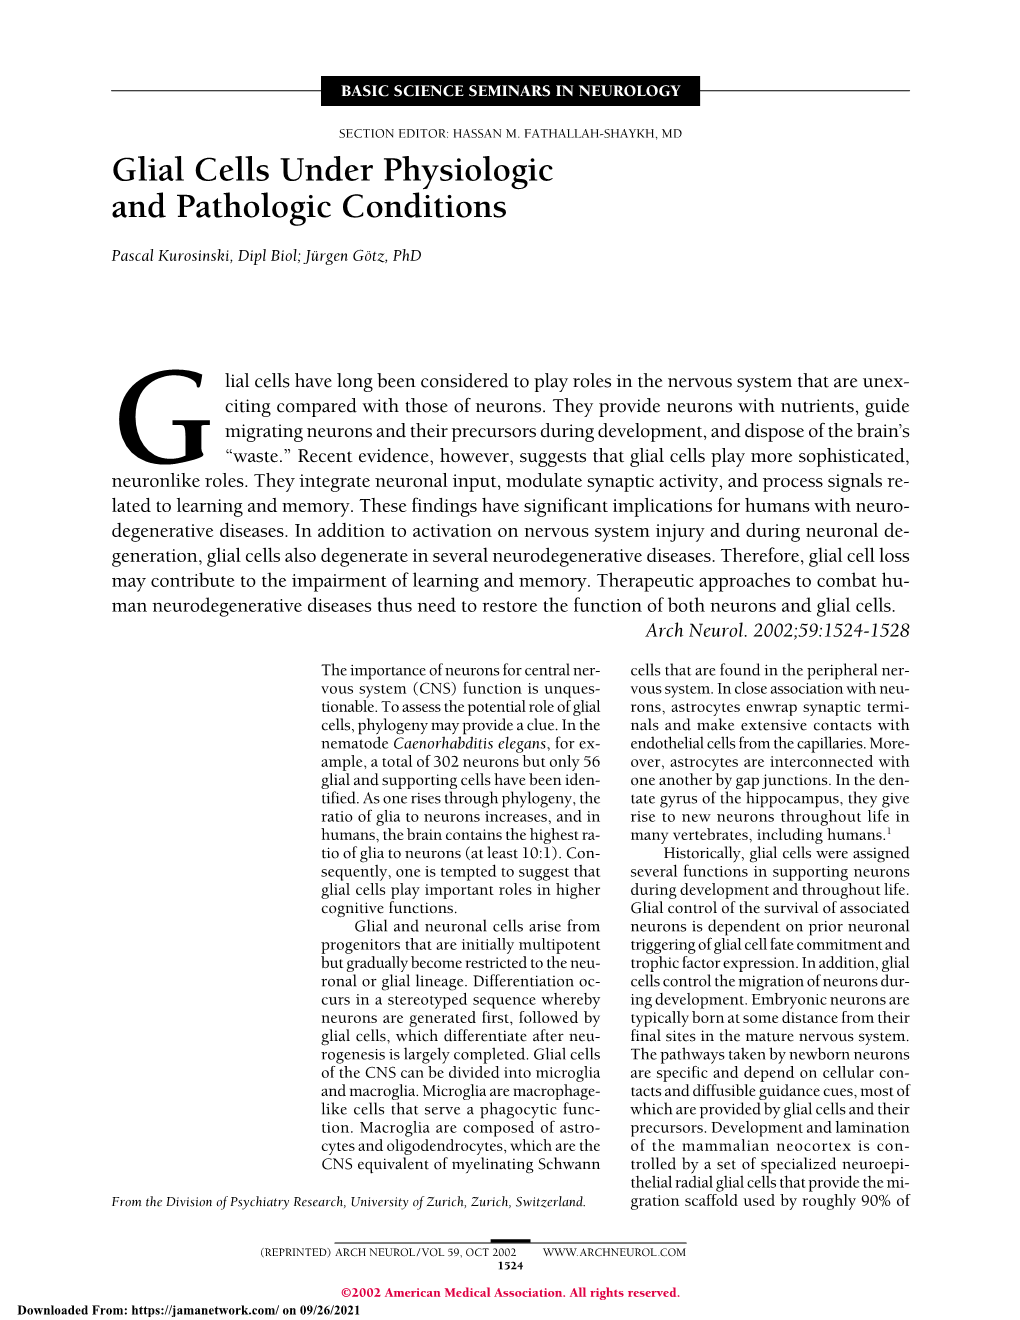 Glial Cells Under Physiologic and Pathologic Conditions